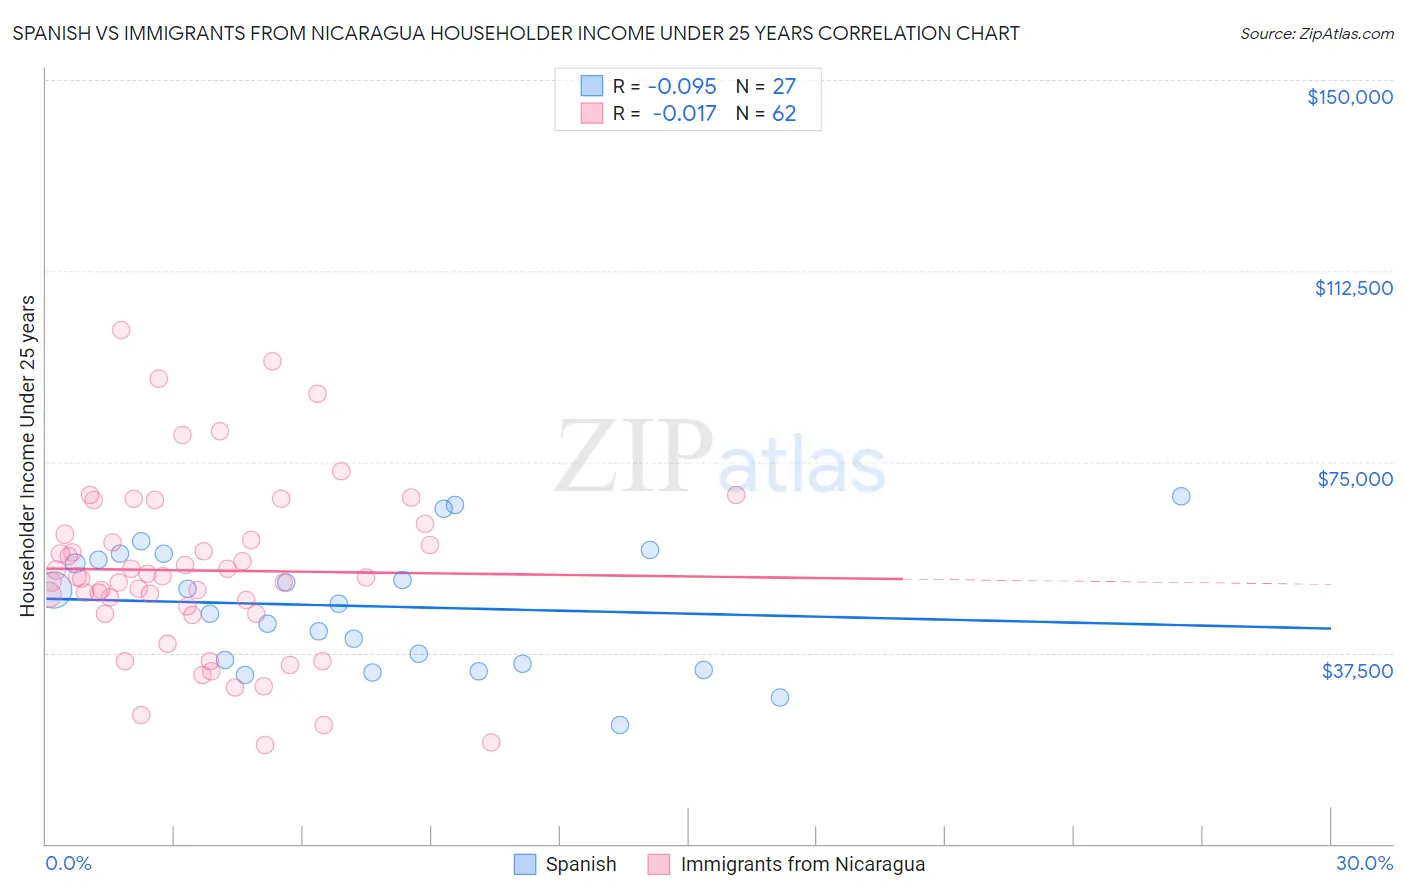 Spanish vs Immigrants from Nicaragua Householder Income Under 25 years